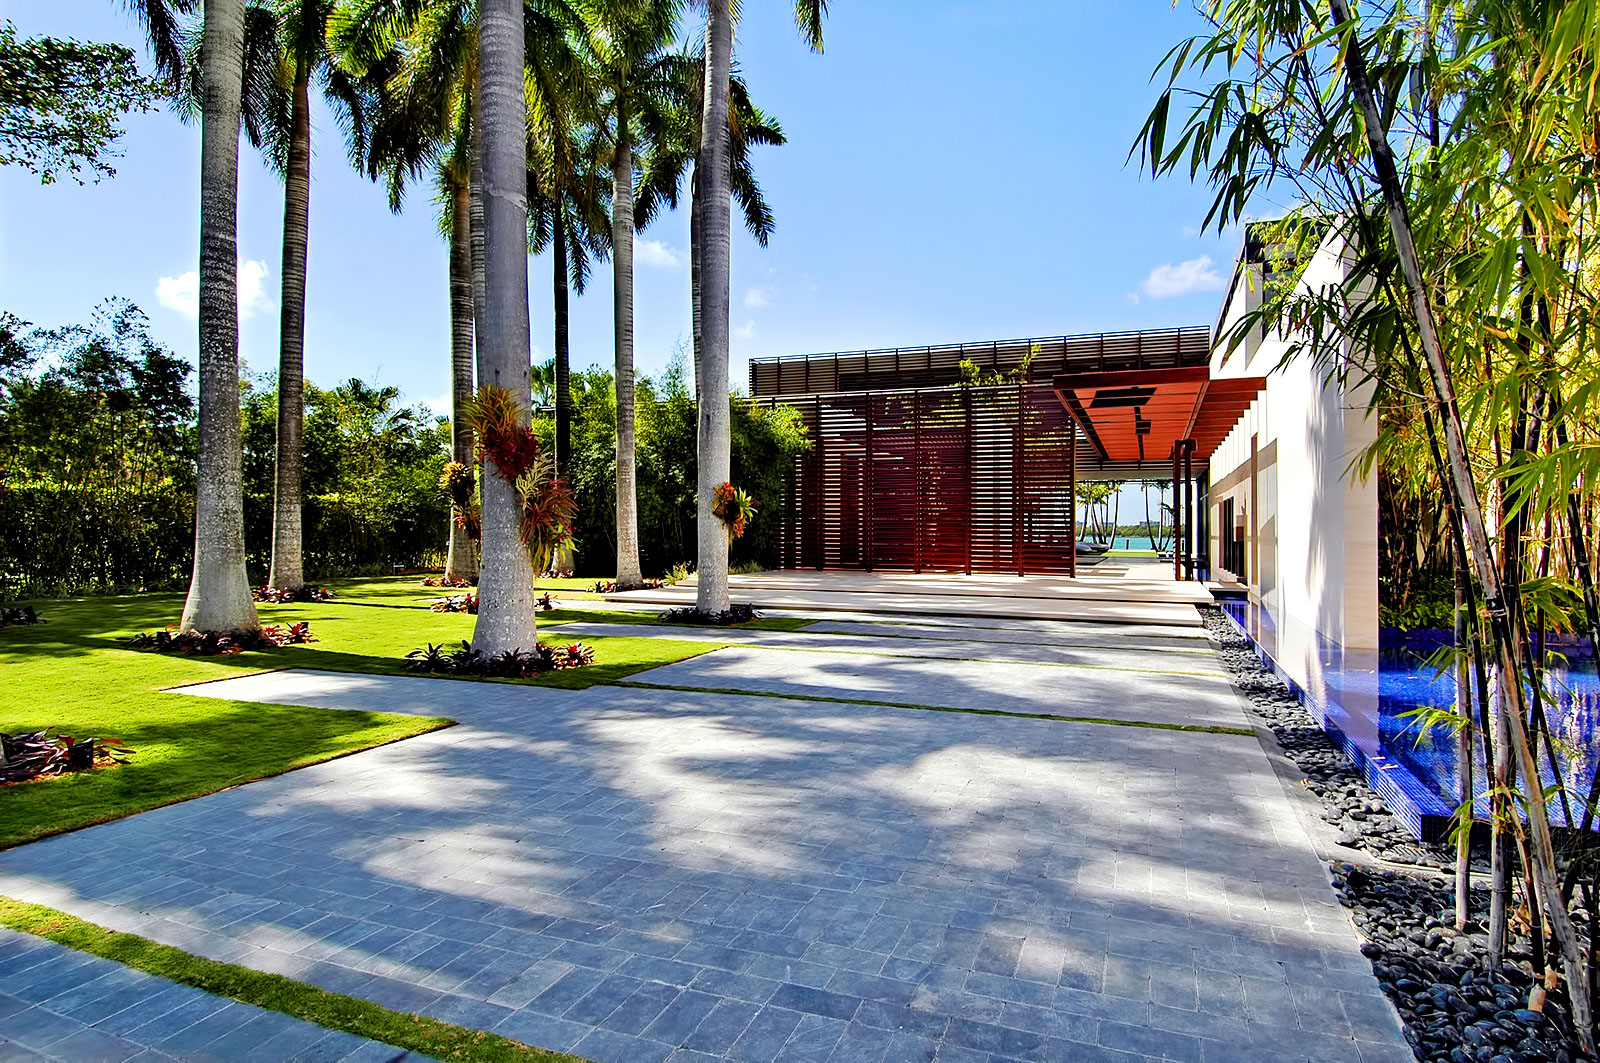 The Most Expensive Home Sold on Record in Miami-Dade, Florida – 3 Indian Creek Island Estate